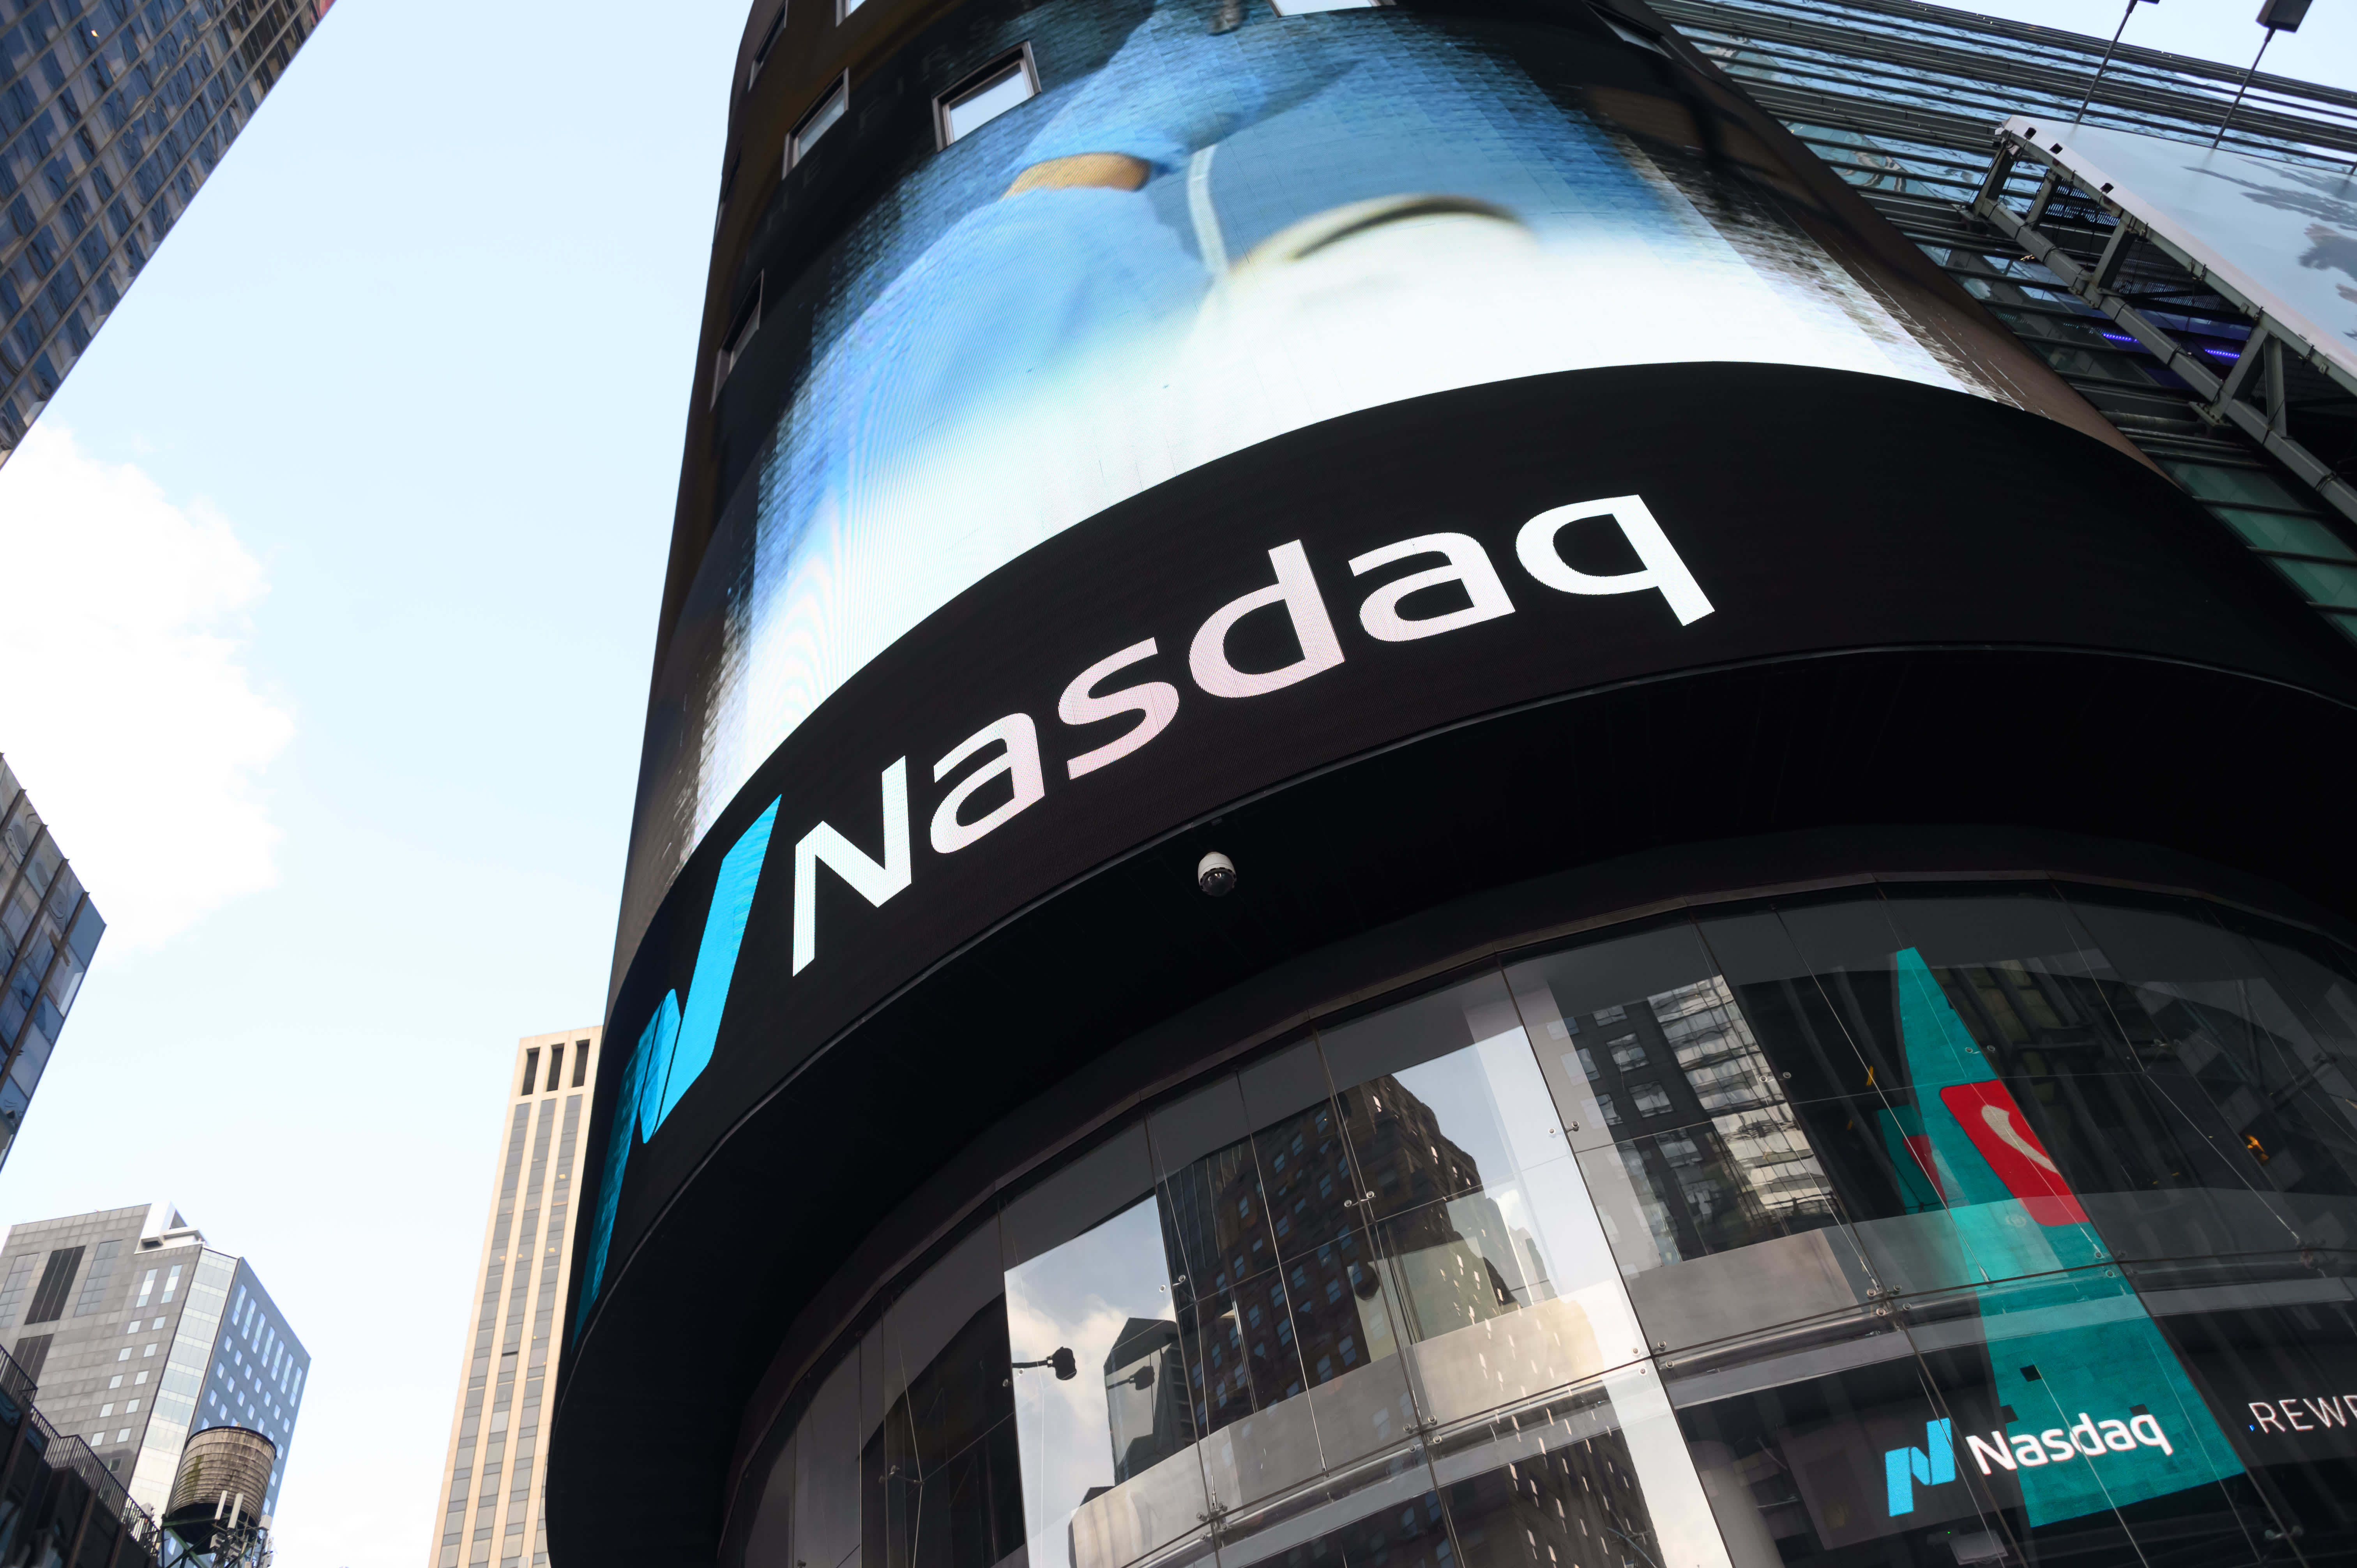 Invesco is launching a new Nasdaq ETF to capitalize on the tech craze